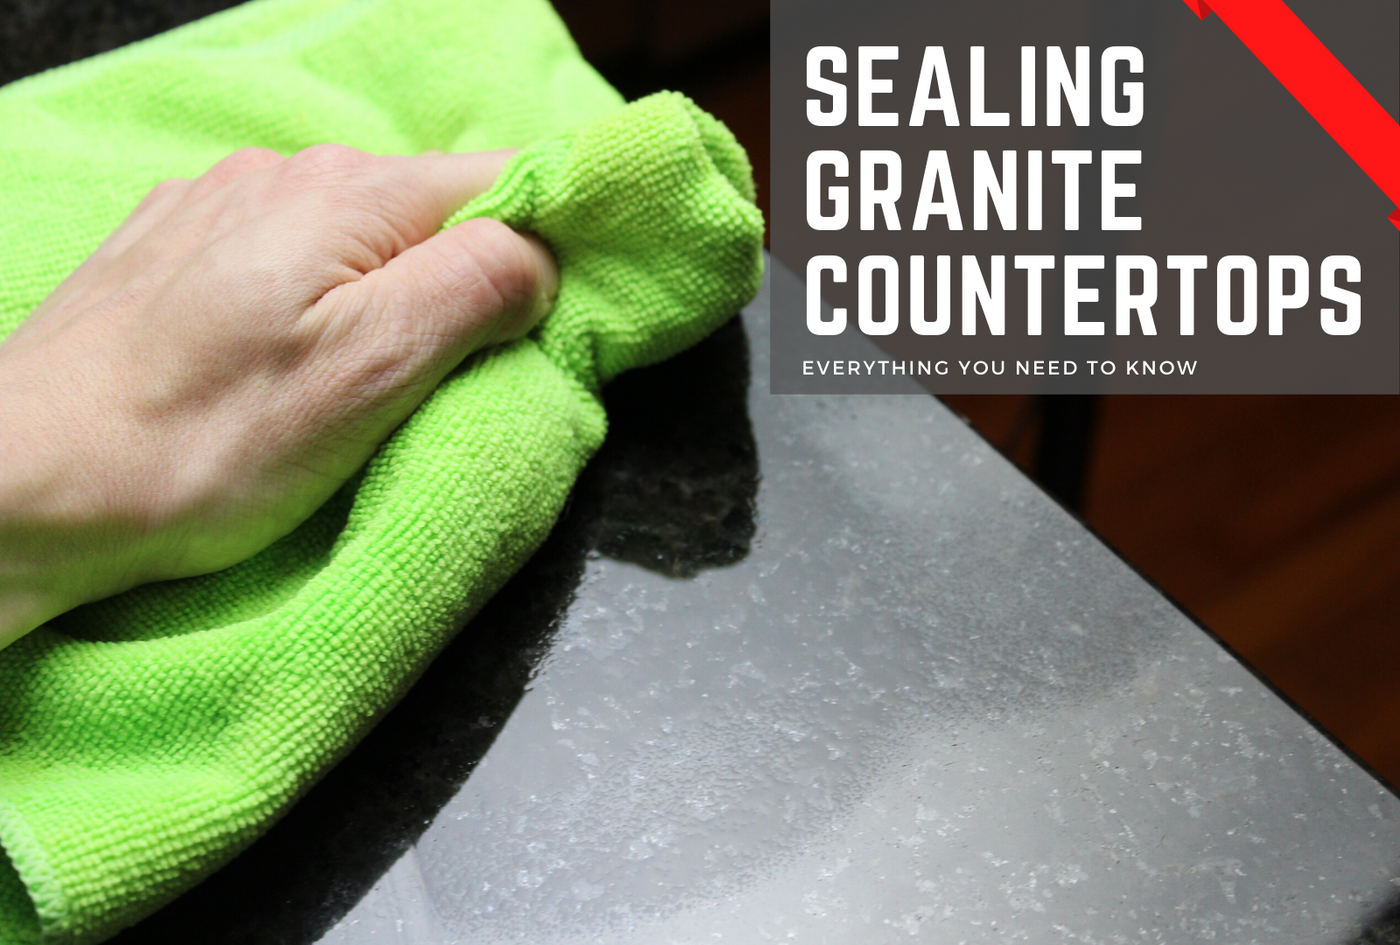 How to Seal Granite Countertops: What to Know